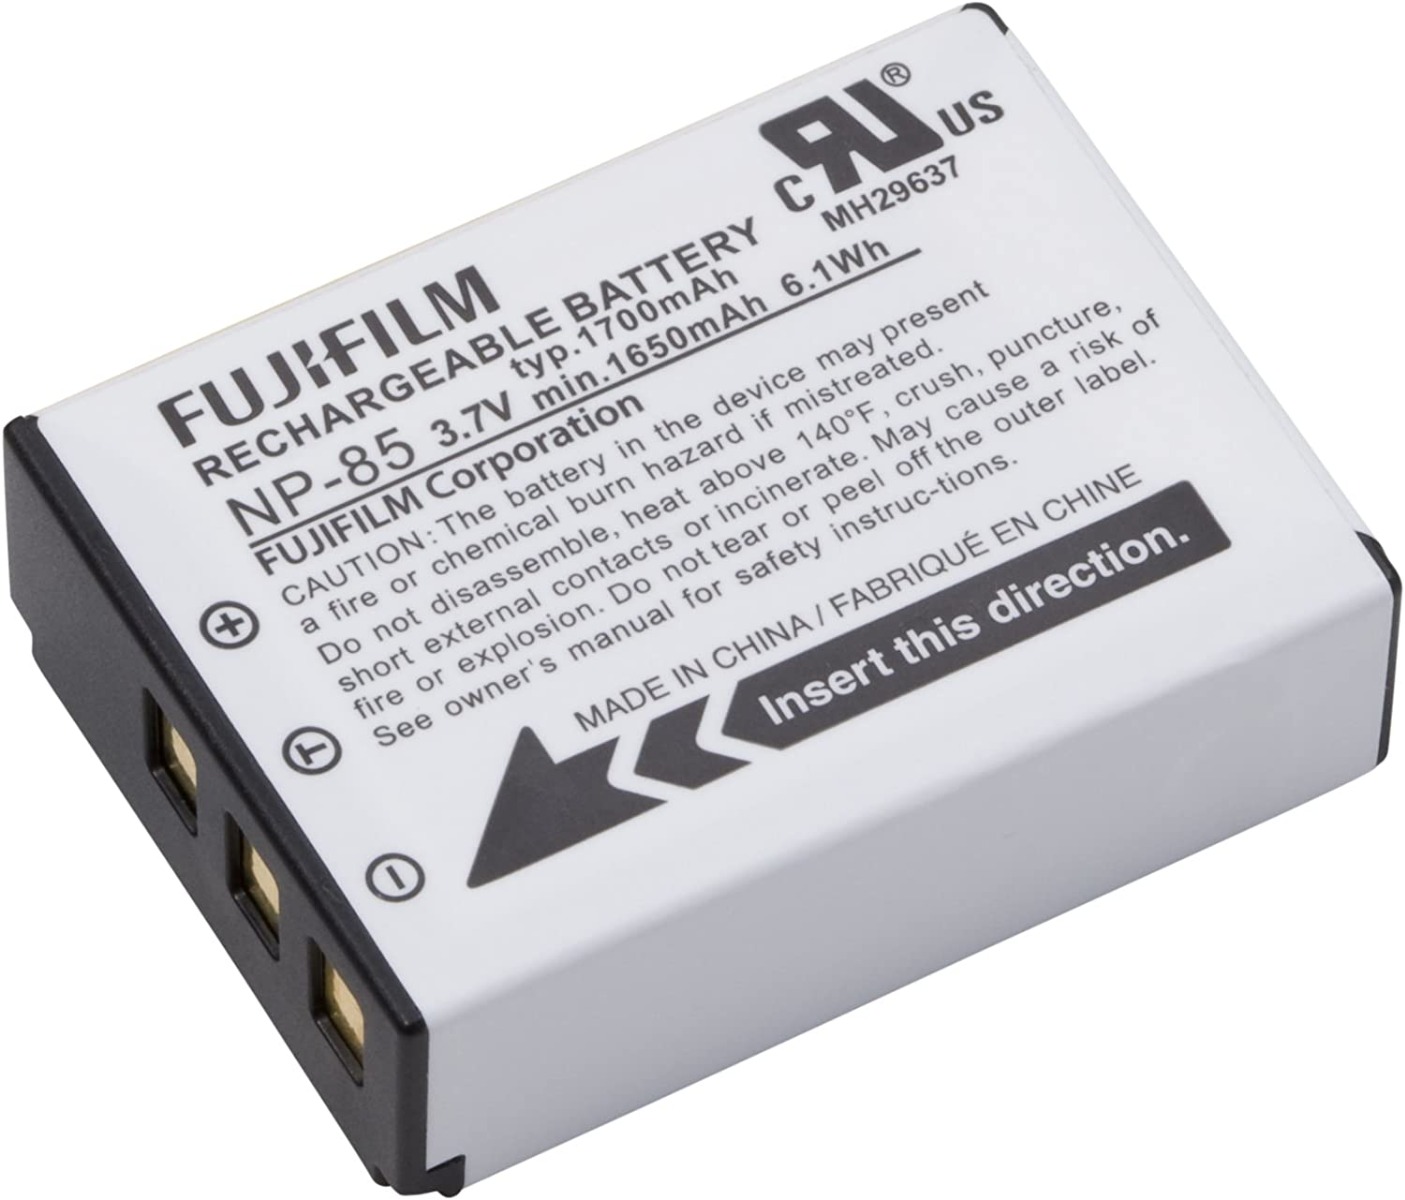 Fujifilm Np-85 Lithium-Ion Rechargeable Battery